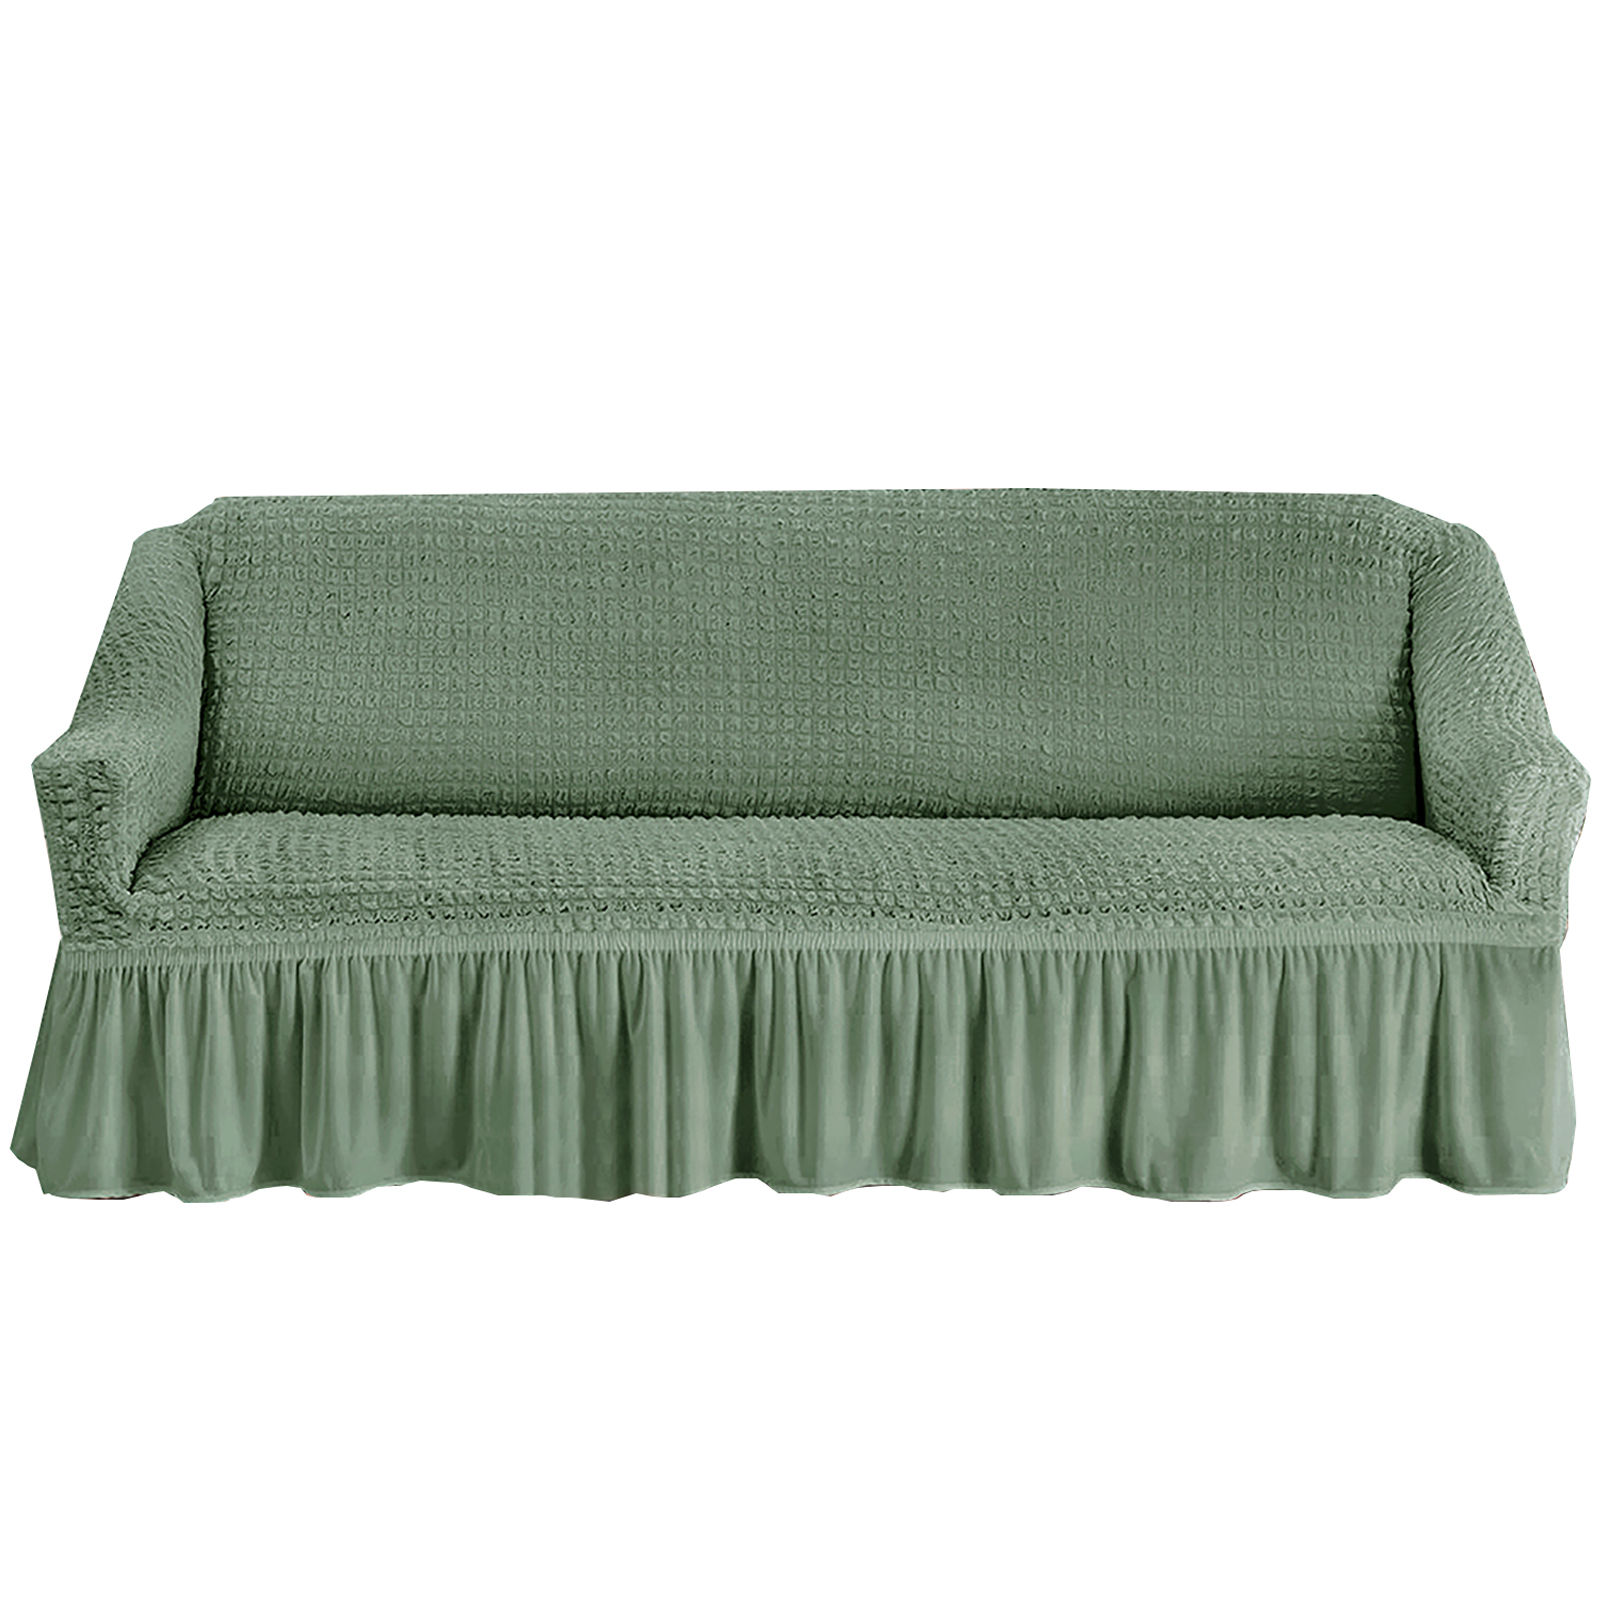 Stretch Sofa Slipcover, 3 Seater Sofa Slipcovers With Skirt With Armless Soft Sofa Cover Elastic Straps Sofa Slipcover For Living Room Kids Pets-Green B-X-Large